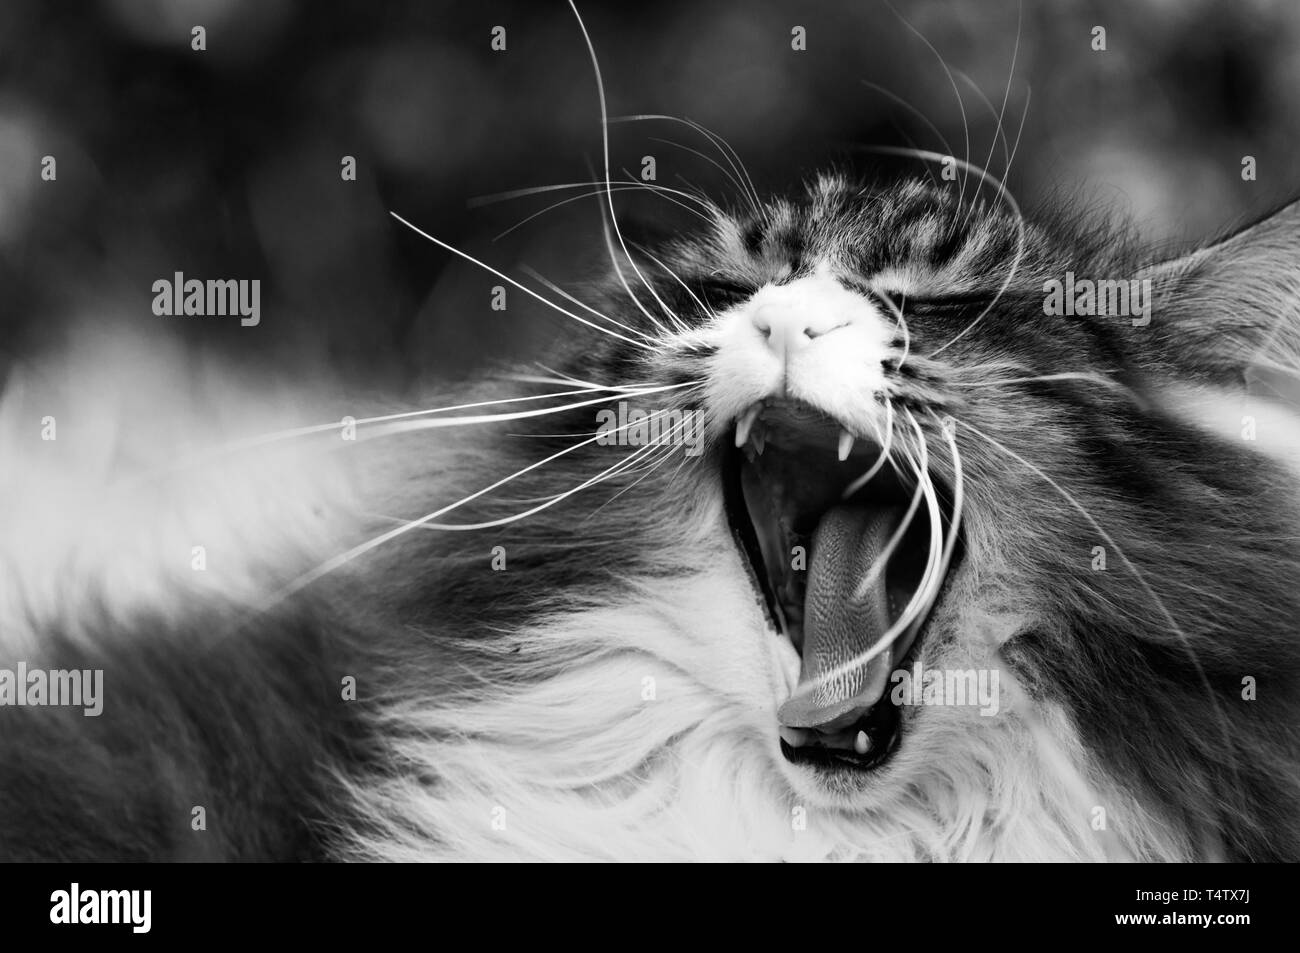 Beautiful norwegian forest cat yawning in a monochrome image. His mouth is open and many long whiskers are all around his nose Stock Photo